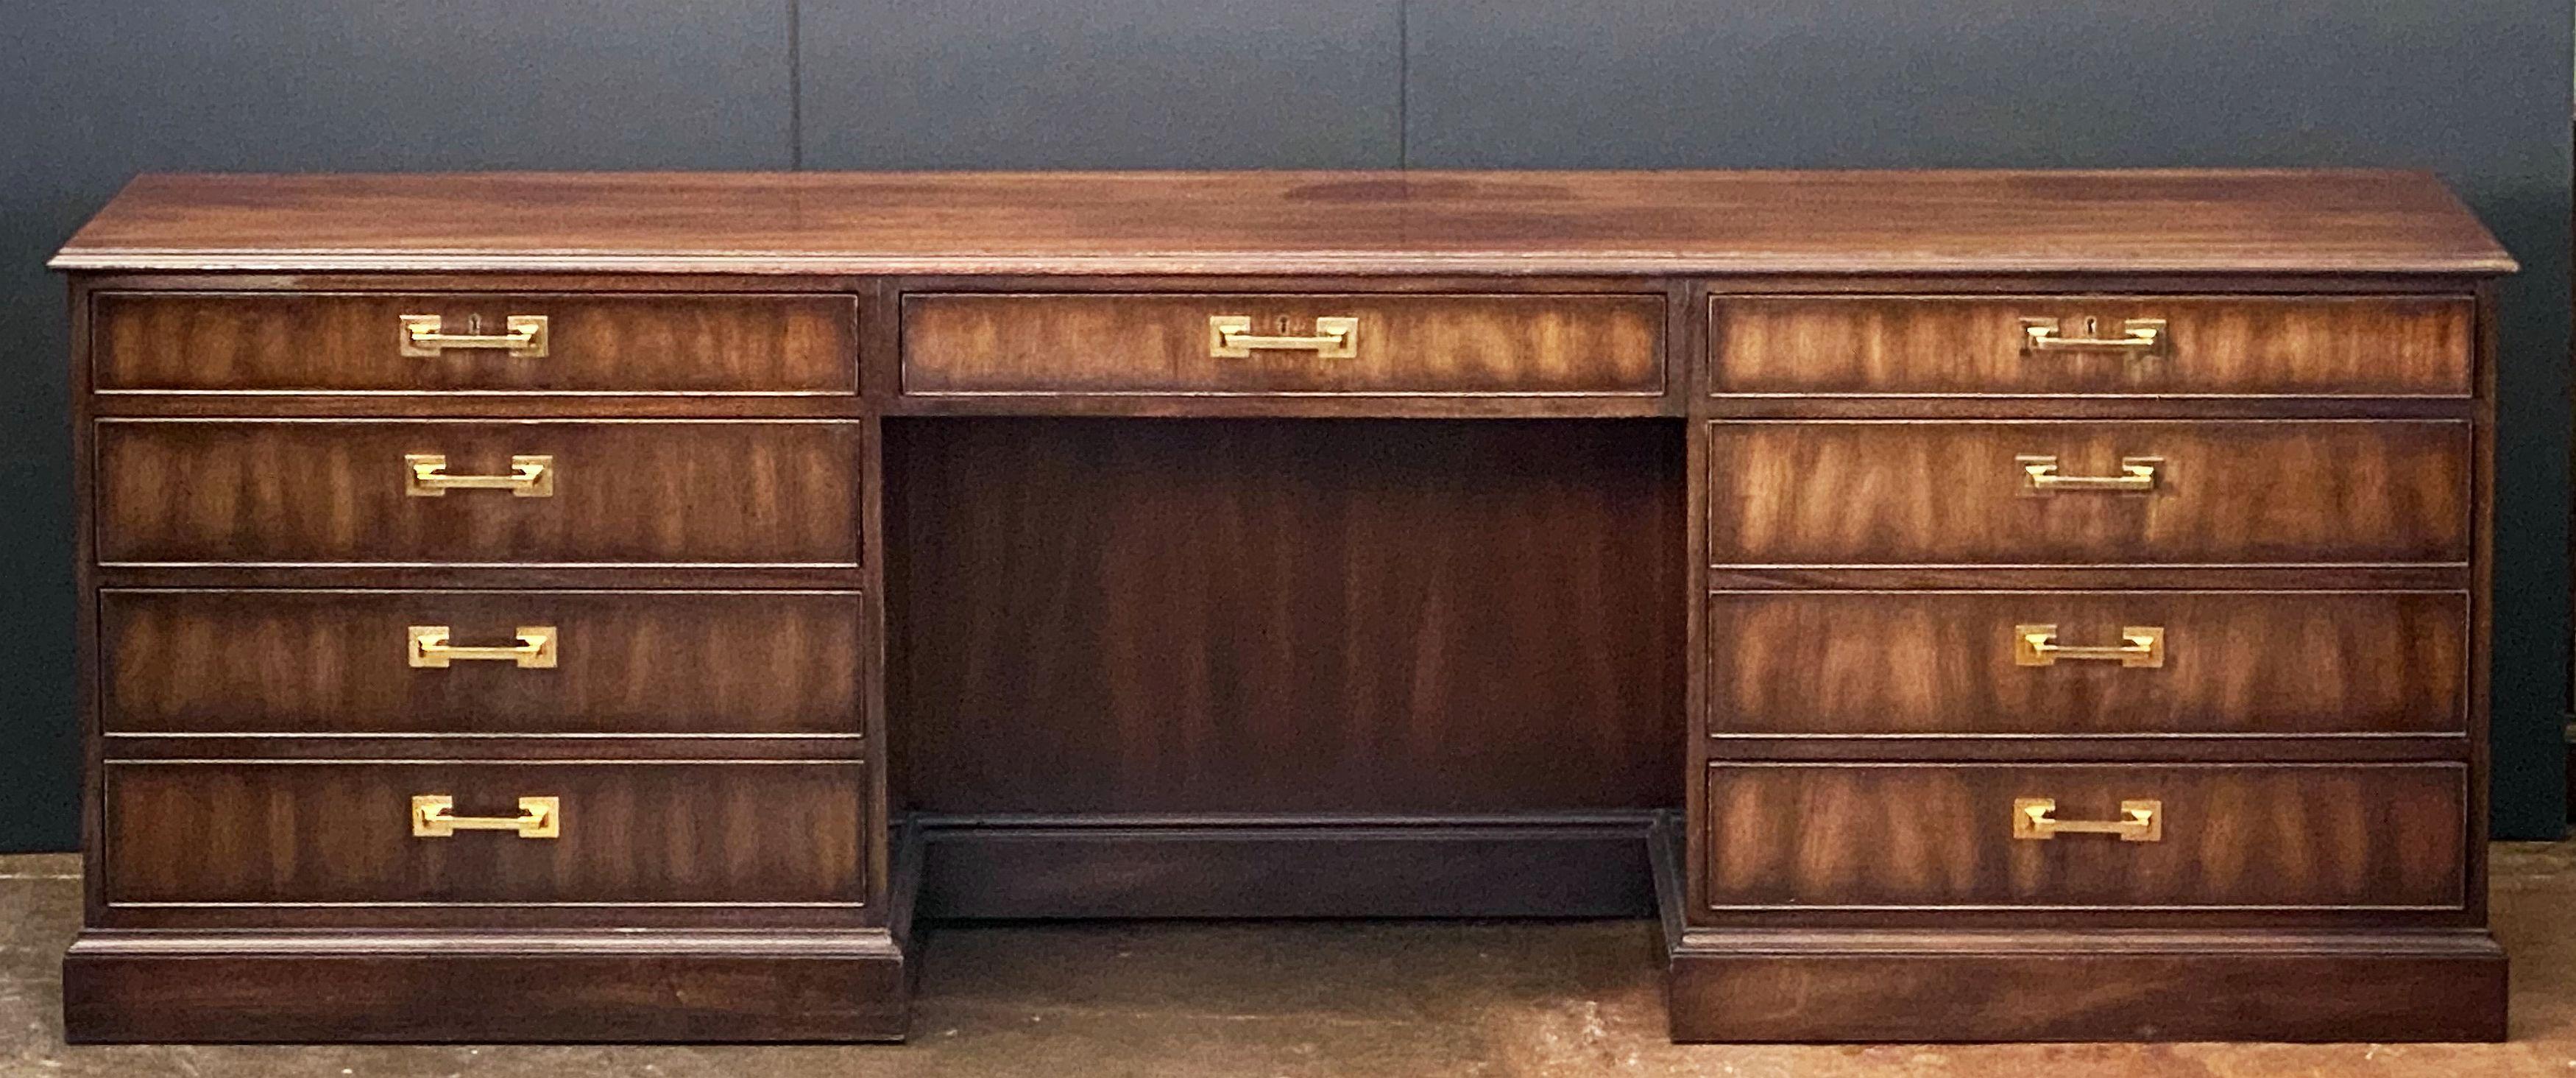 A fine large executive console table or storage cabinet, featuring a moulded wood top over a frieze of drawers and one cabinet drawer for files, in a pedestal style with kneehole center, by Kittinger.
With metal Kittinger name plaque in